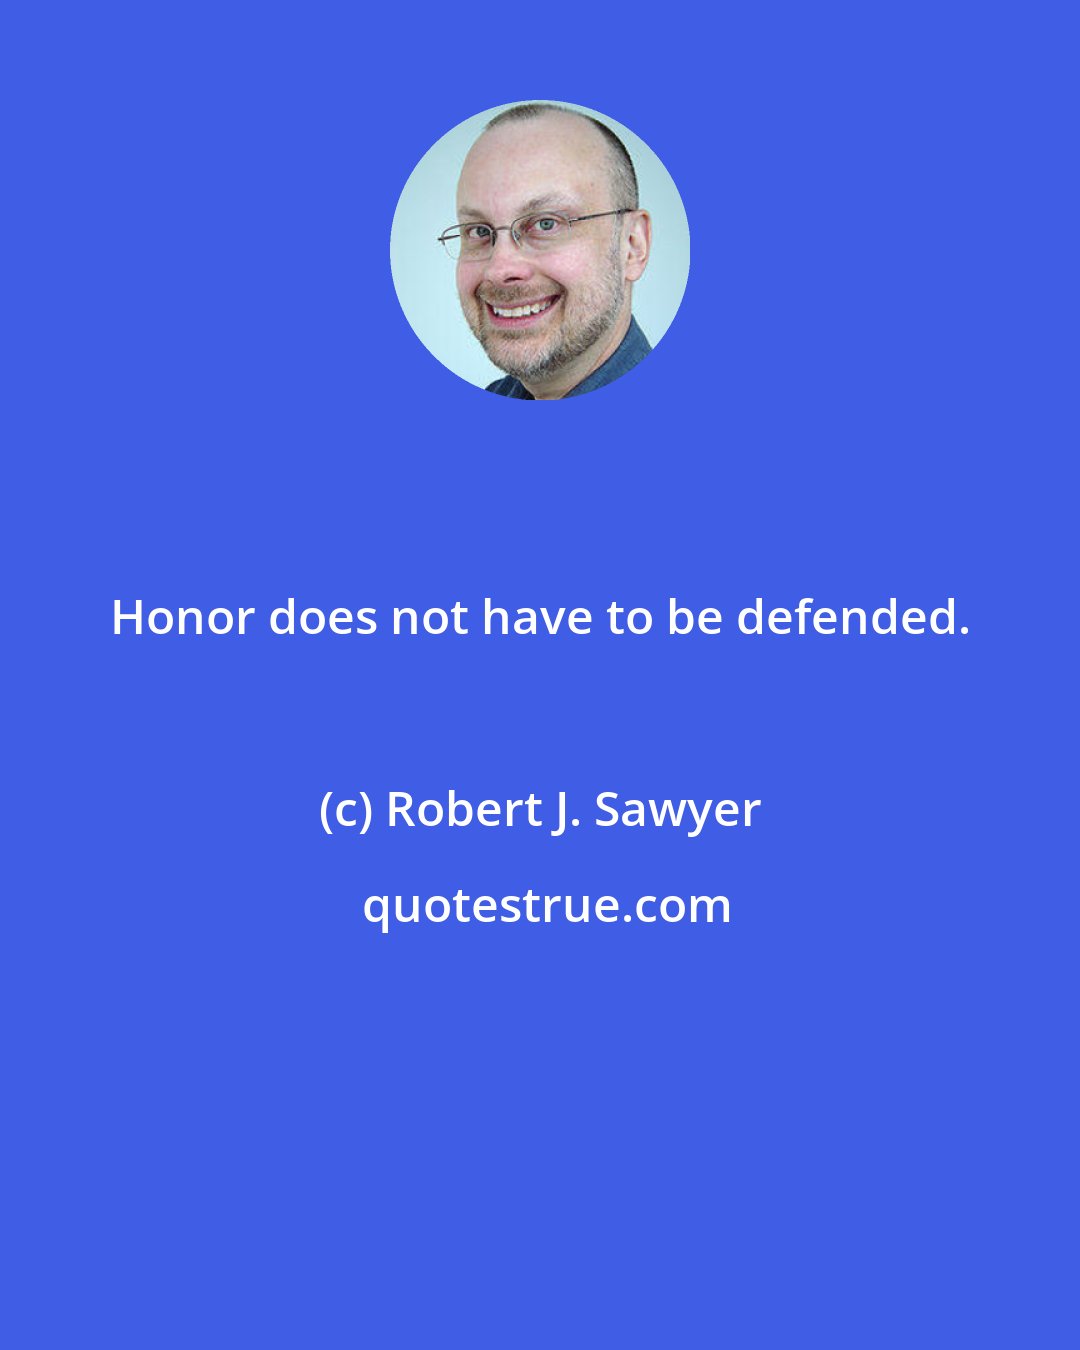 Robert J. Sawyer: Honor does not have to be defended.